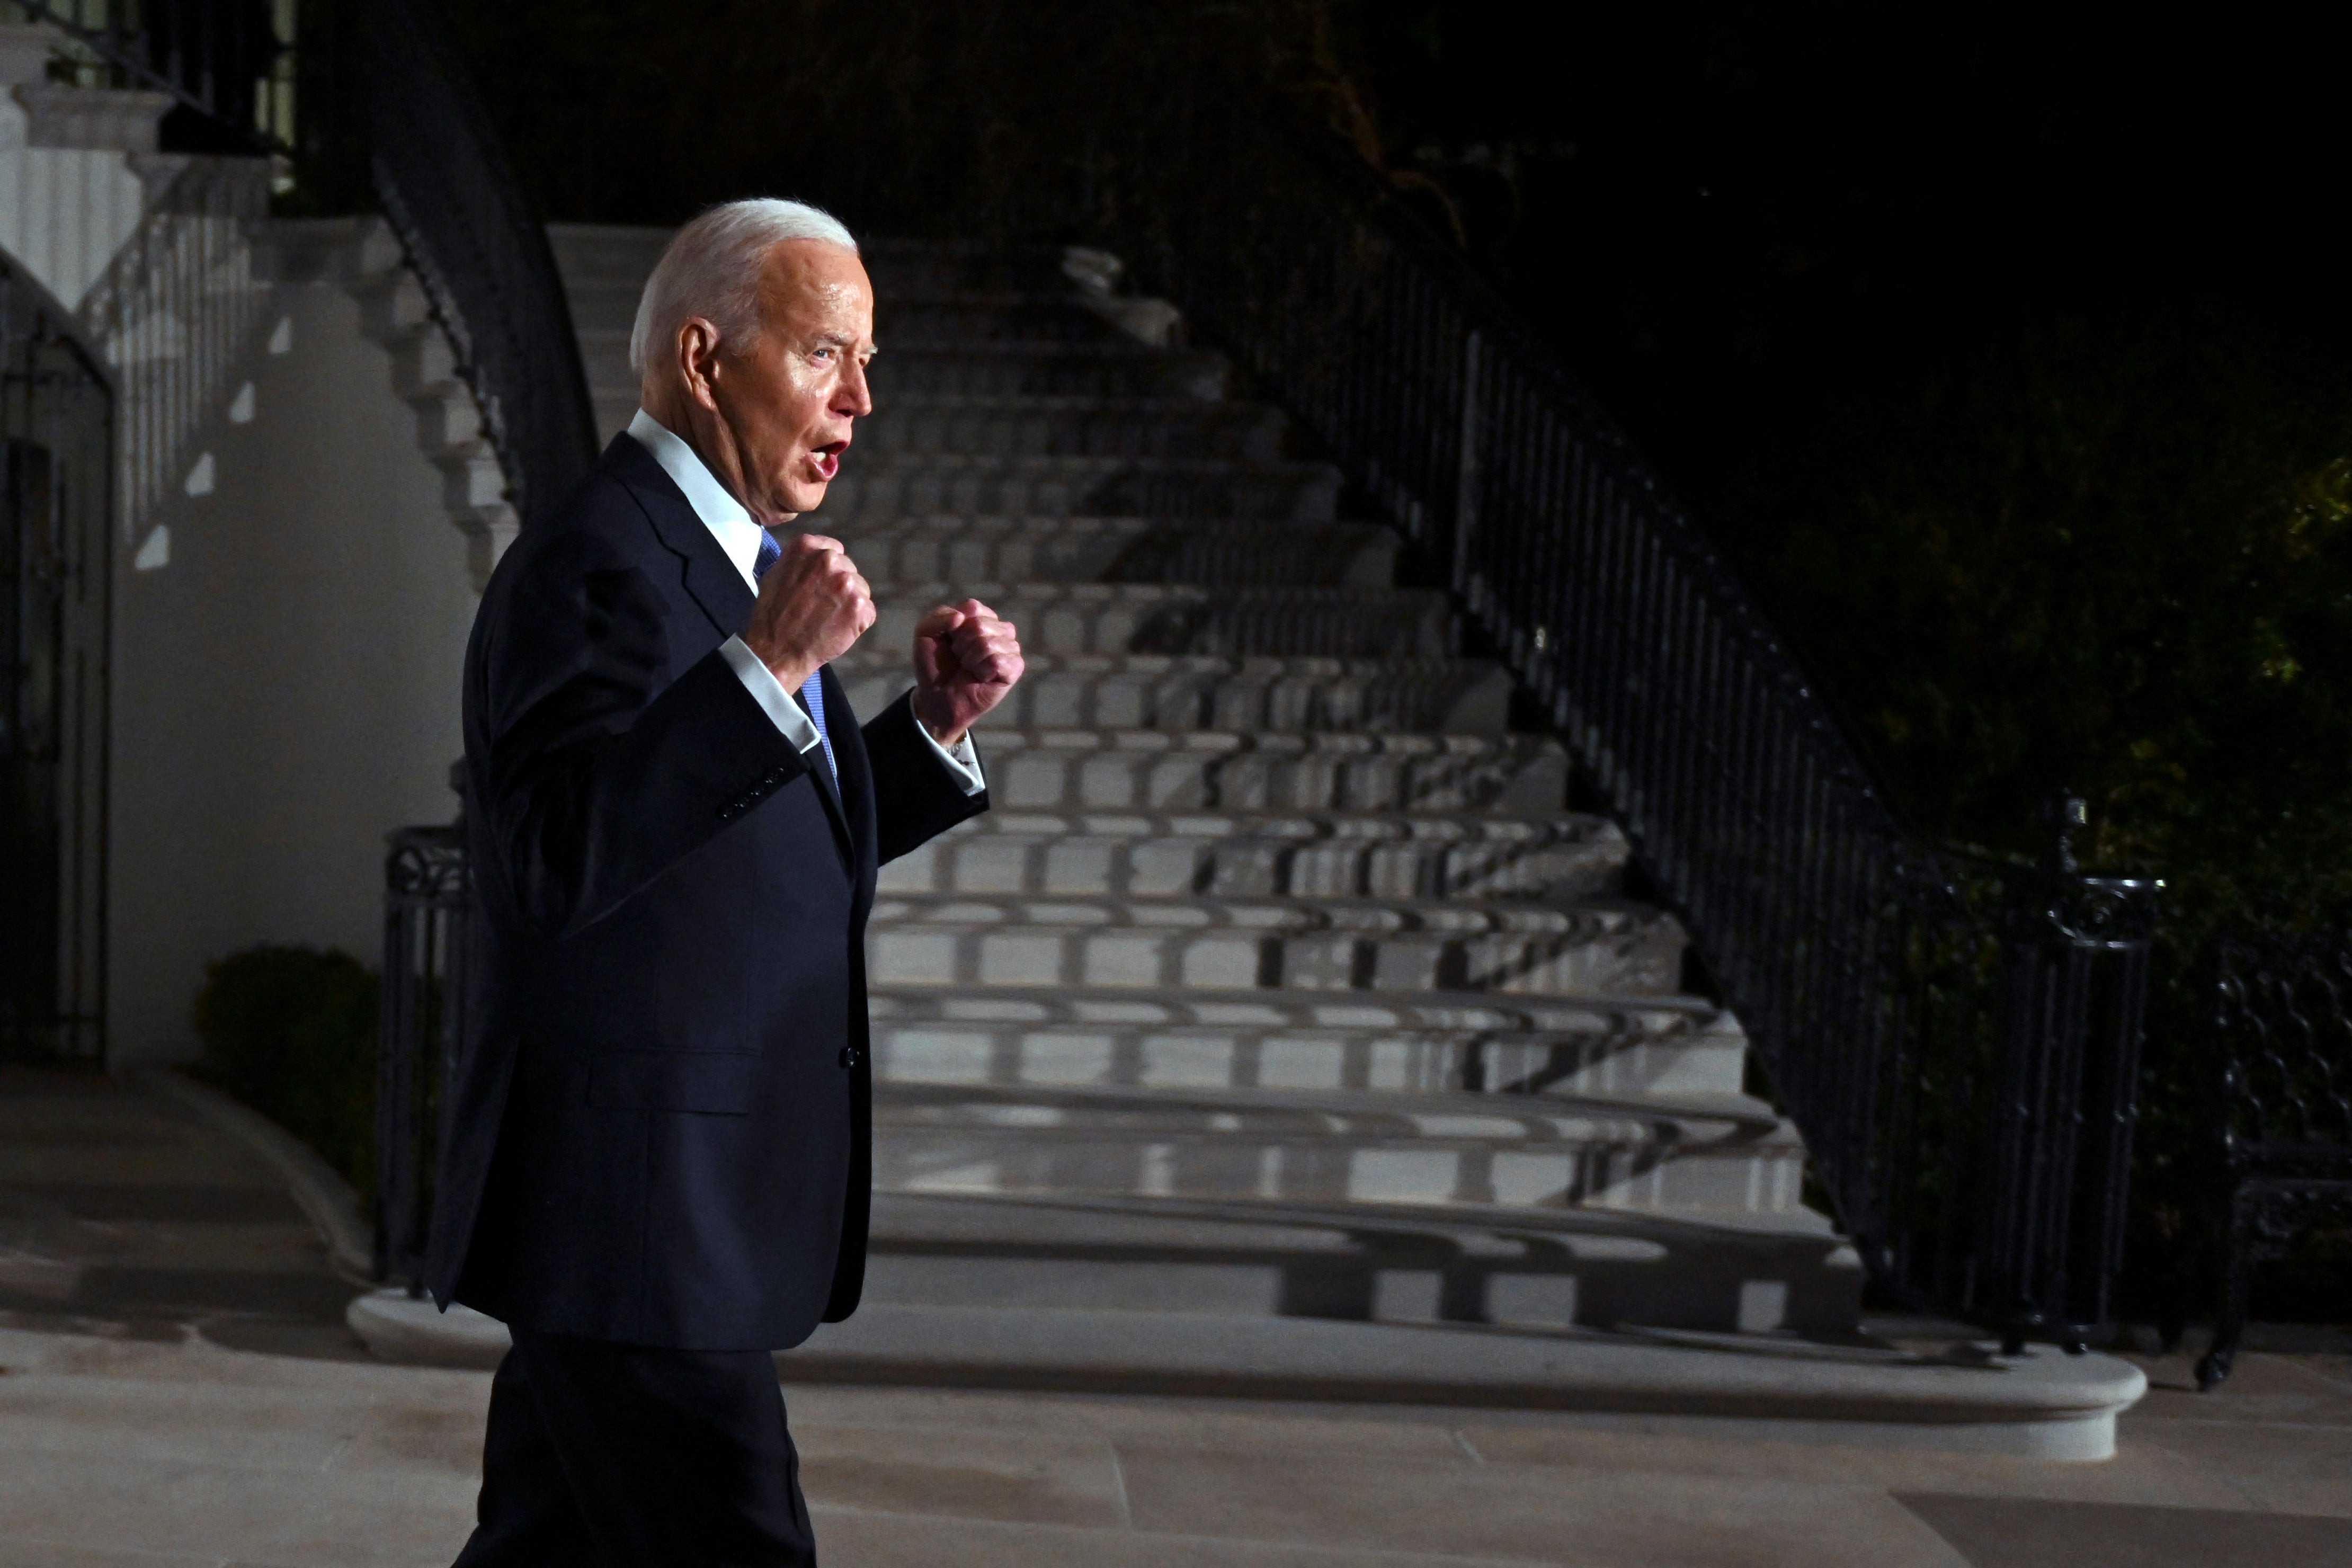 Biden gestures as he leaves the White House